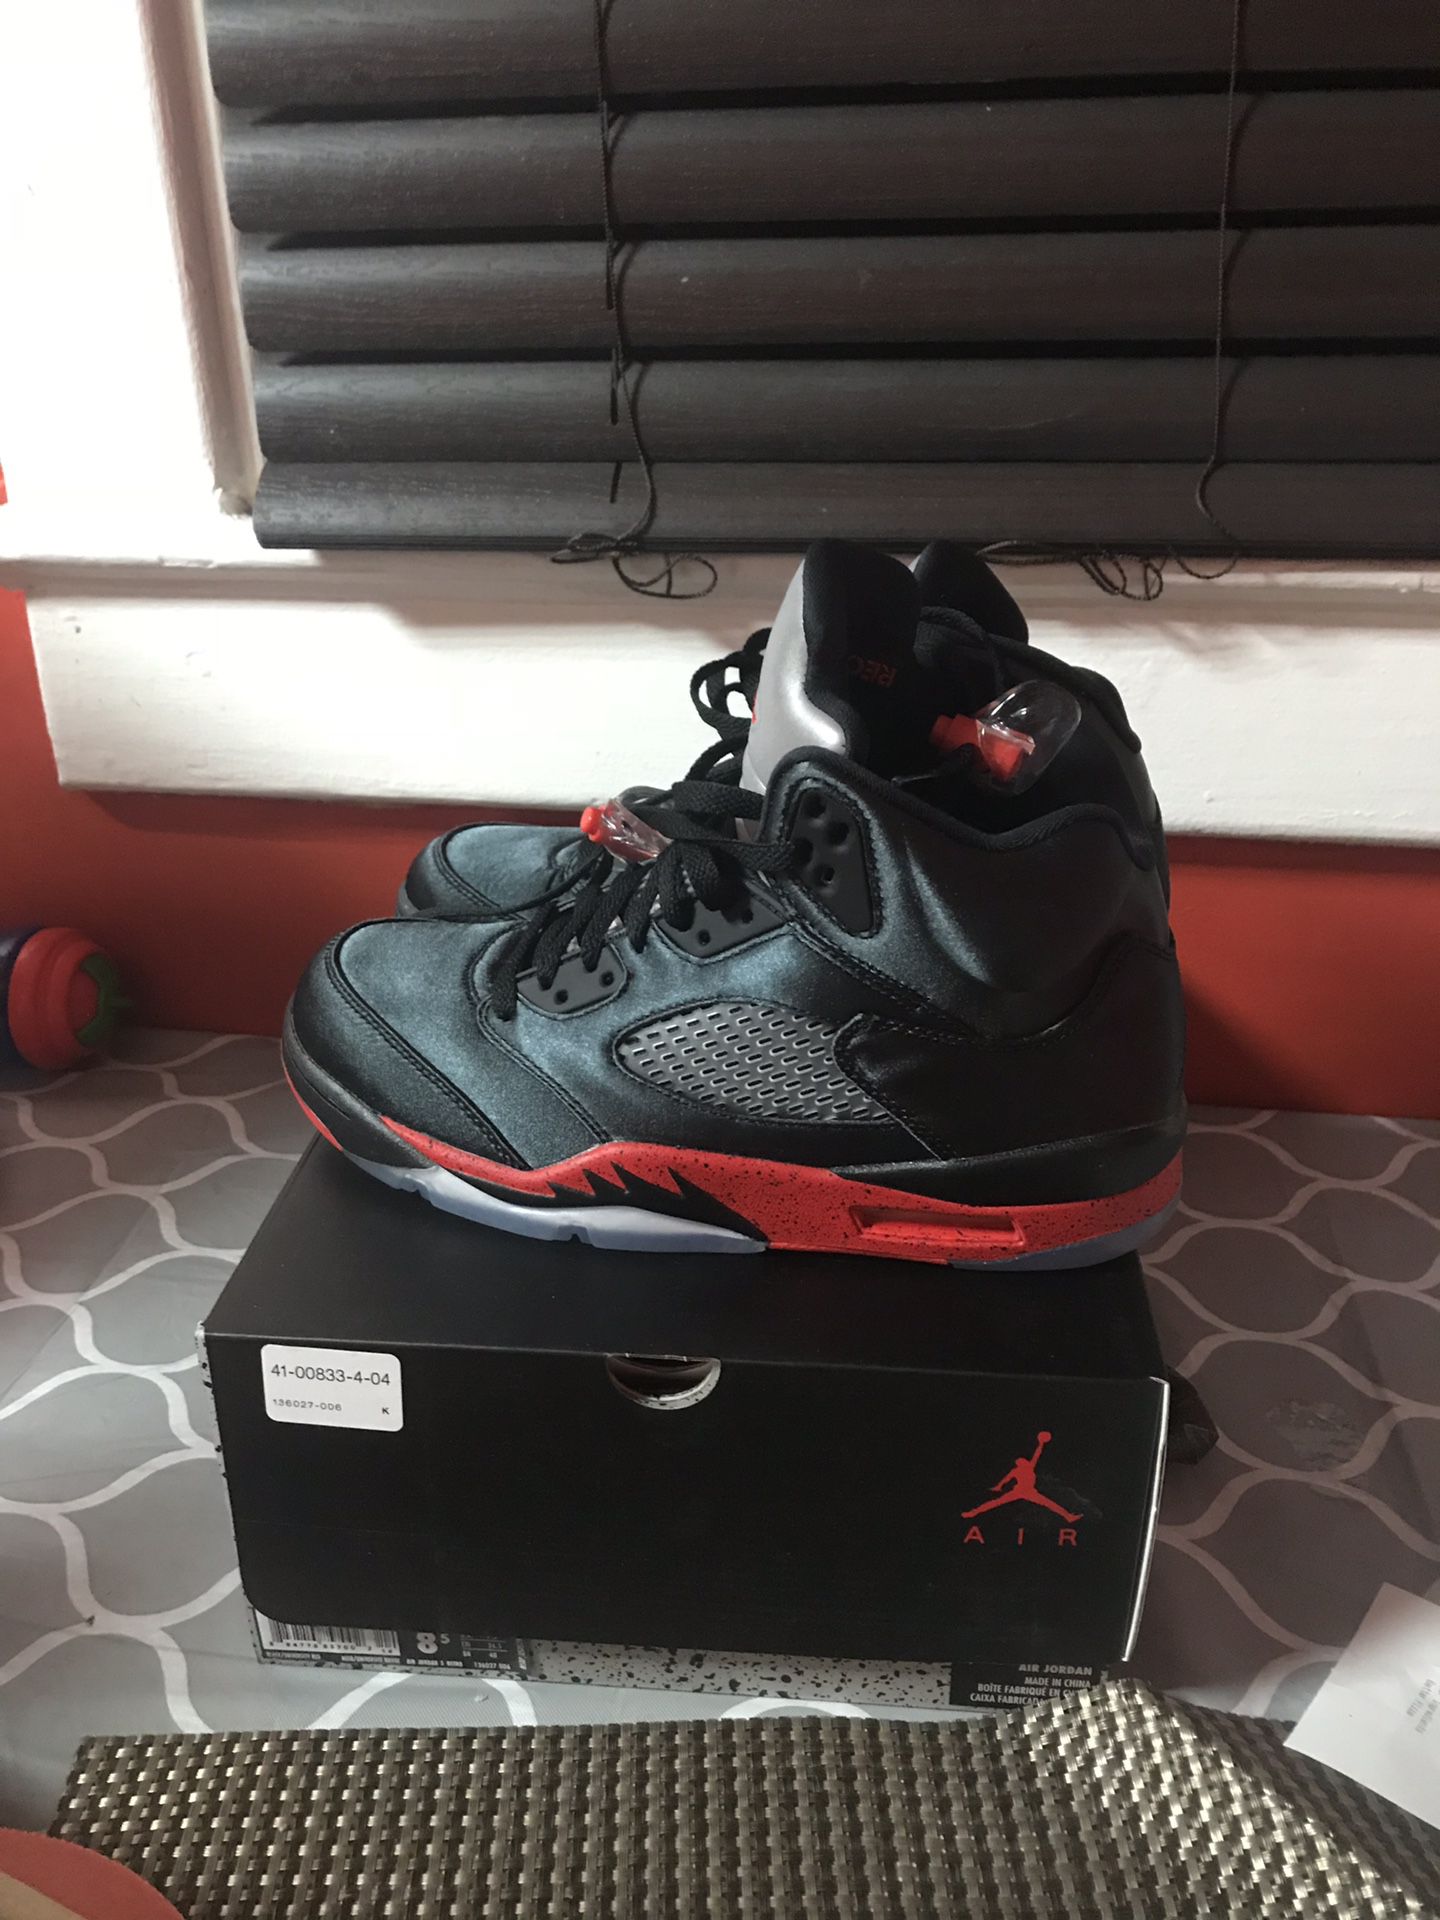 Jordan Retro 5 Nov 2018 8.5 with receipt of purchase from foot action.